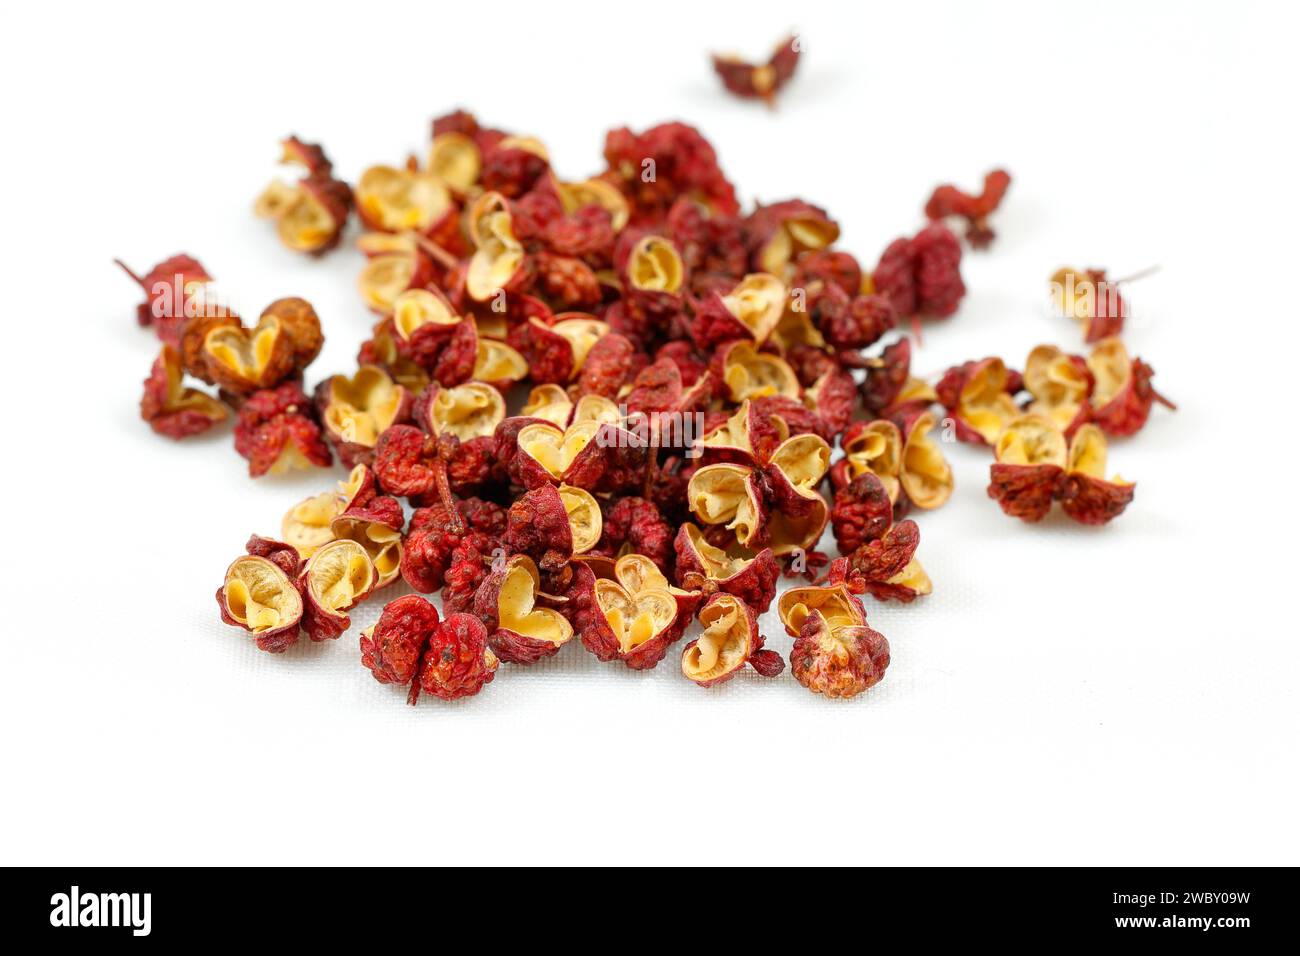 Dried Da Hong Pao Sichuan Peppercorns (Zanthoxylum bungeanum) 大紅袍 花椒 prickly ash berries isolated on a white background. Stock Photo